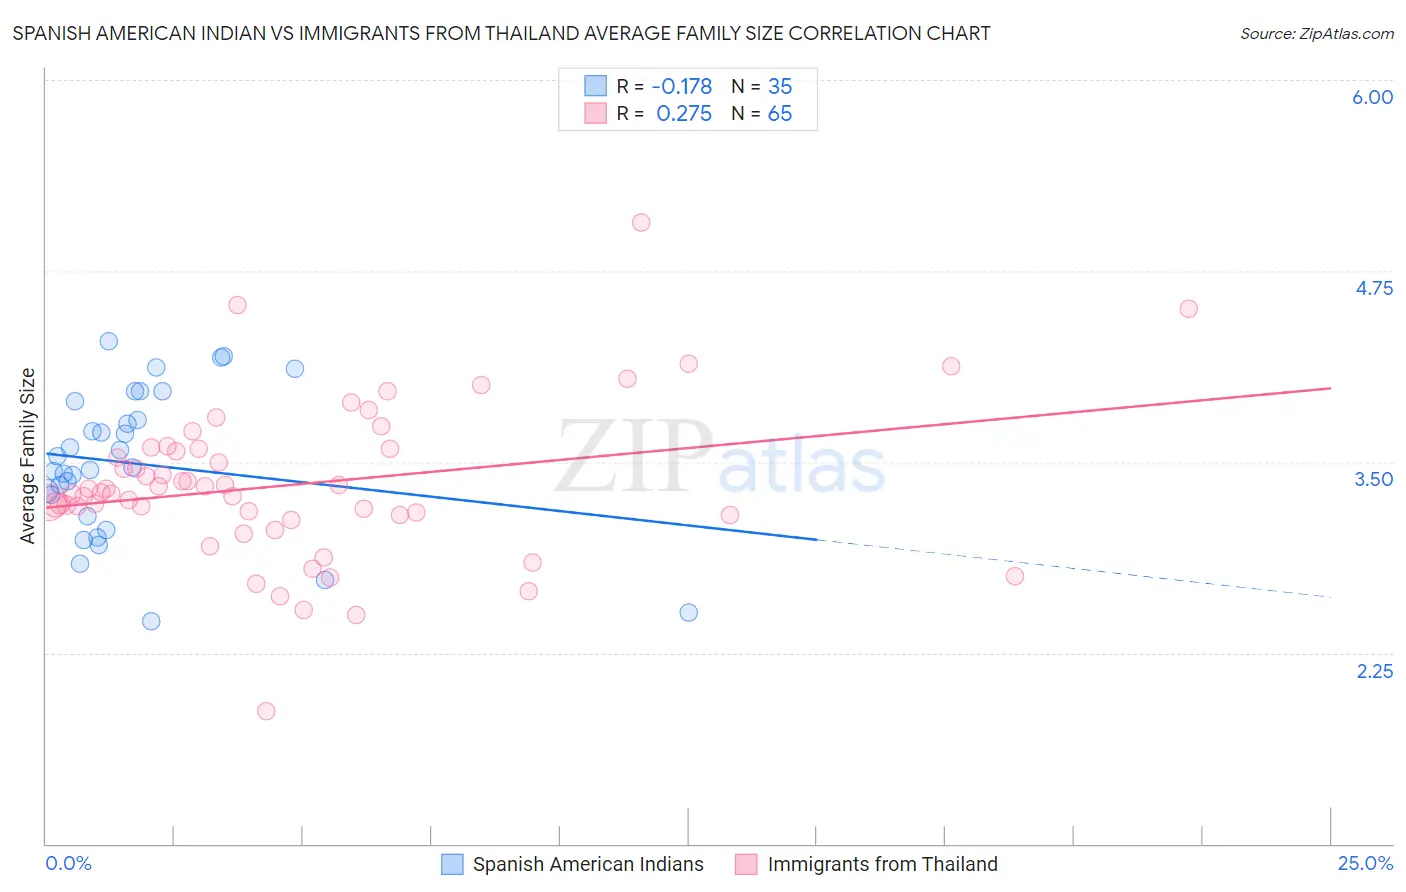 Spanish American Indian vs Immigrants from Thailand Average Family Size